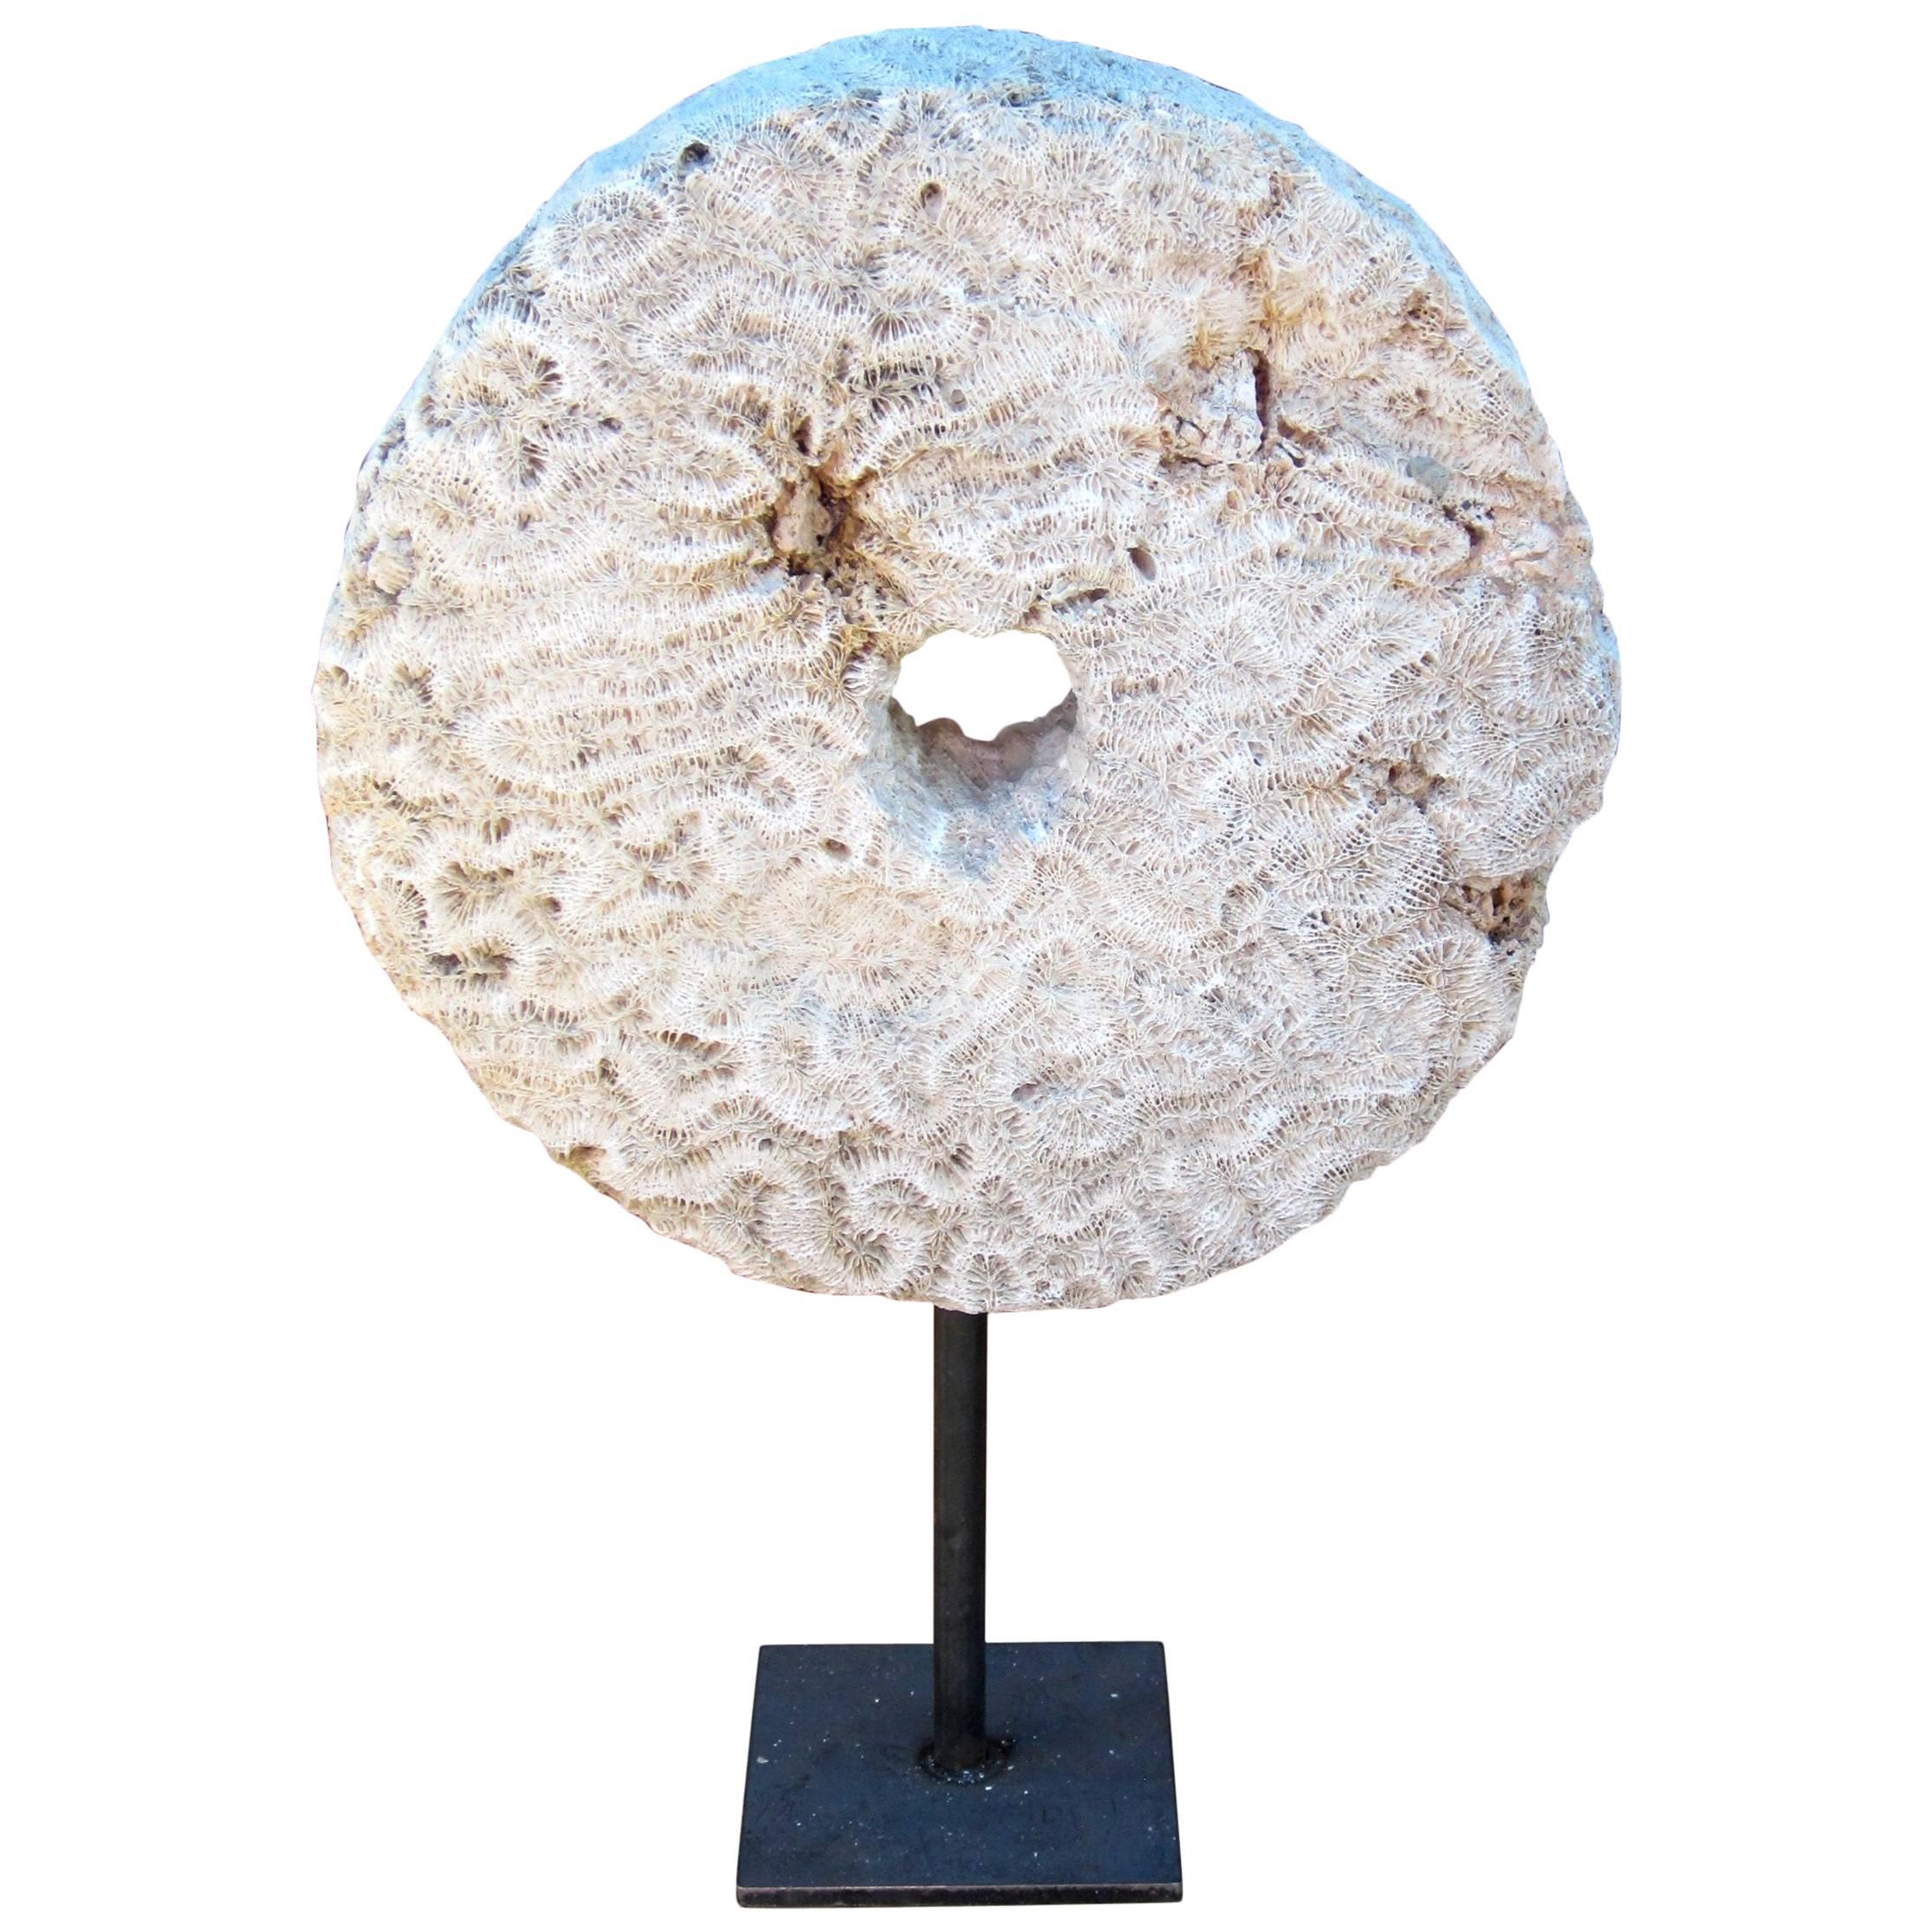 Prehistoric Carved Land Coral Ring on Stand Sculpture, Indonesia